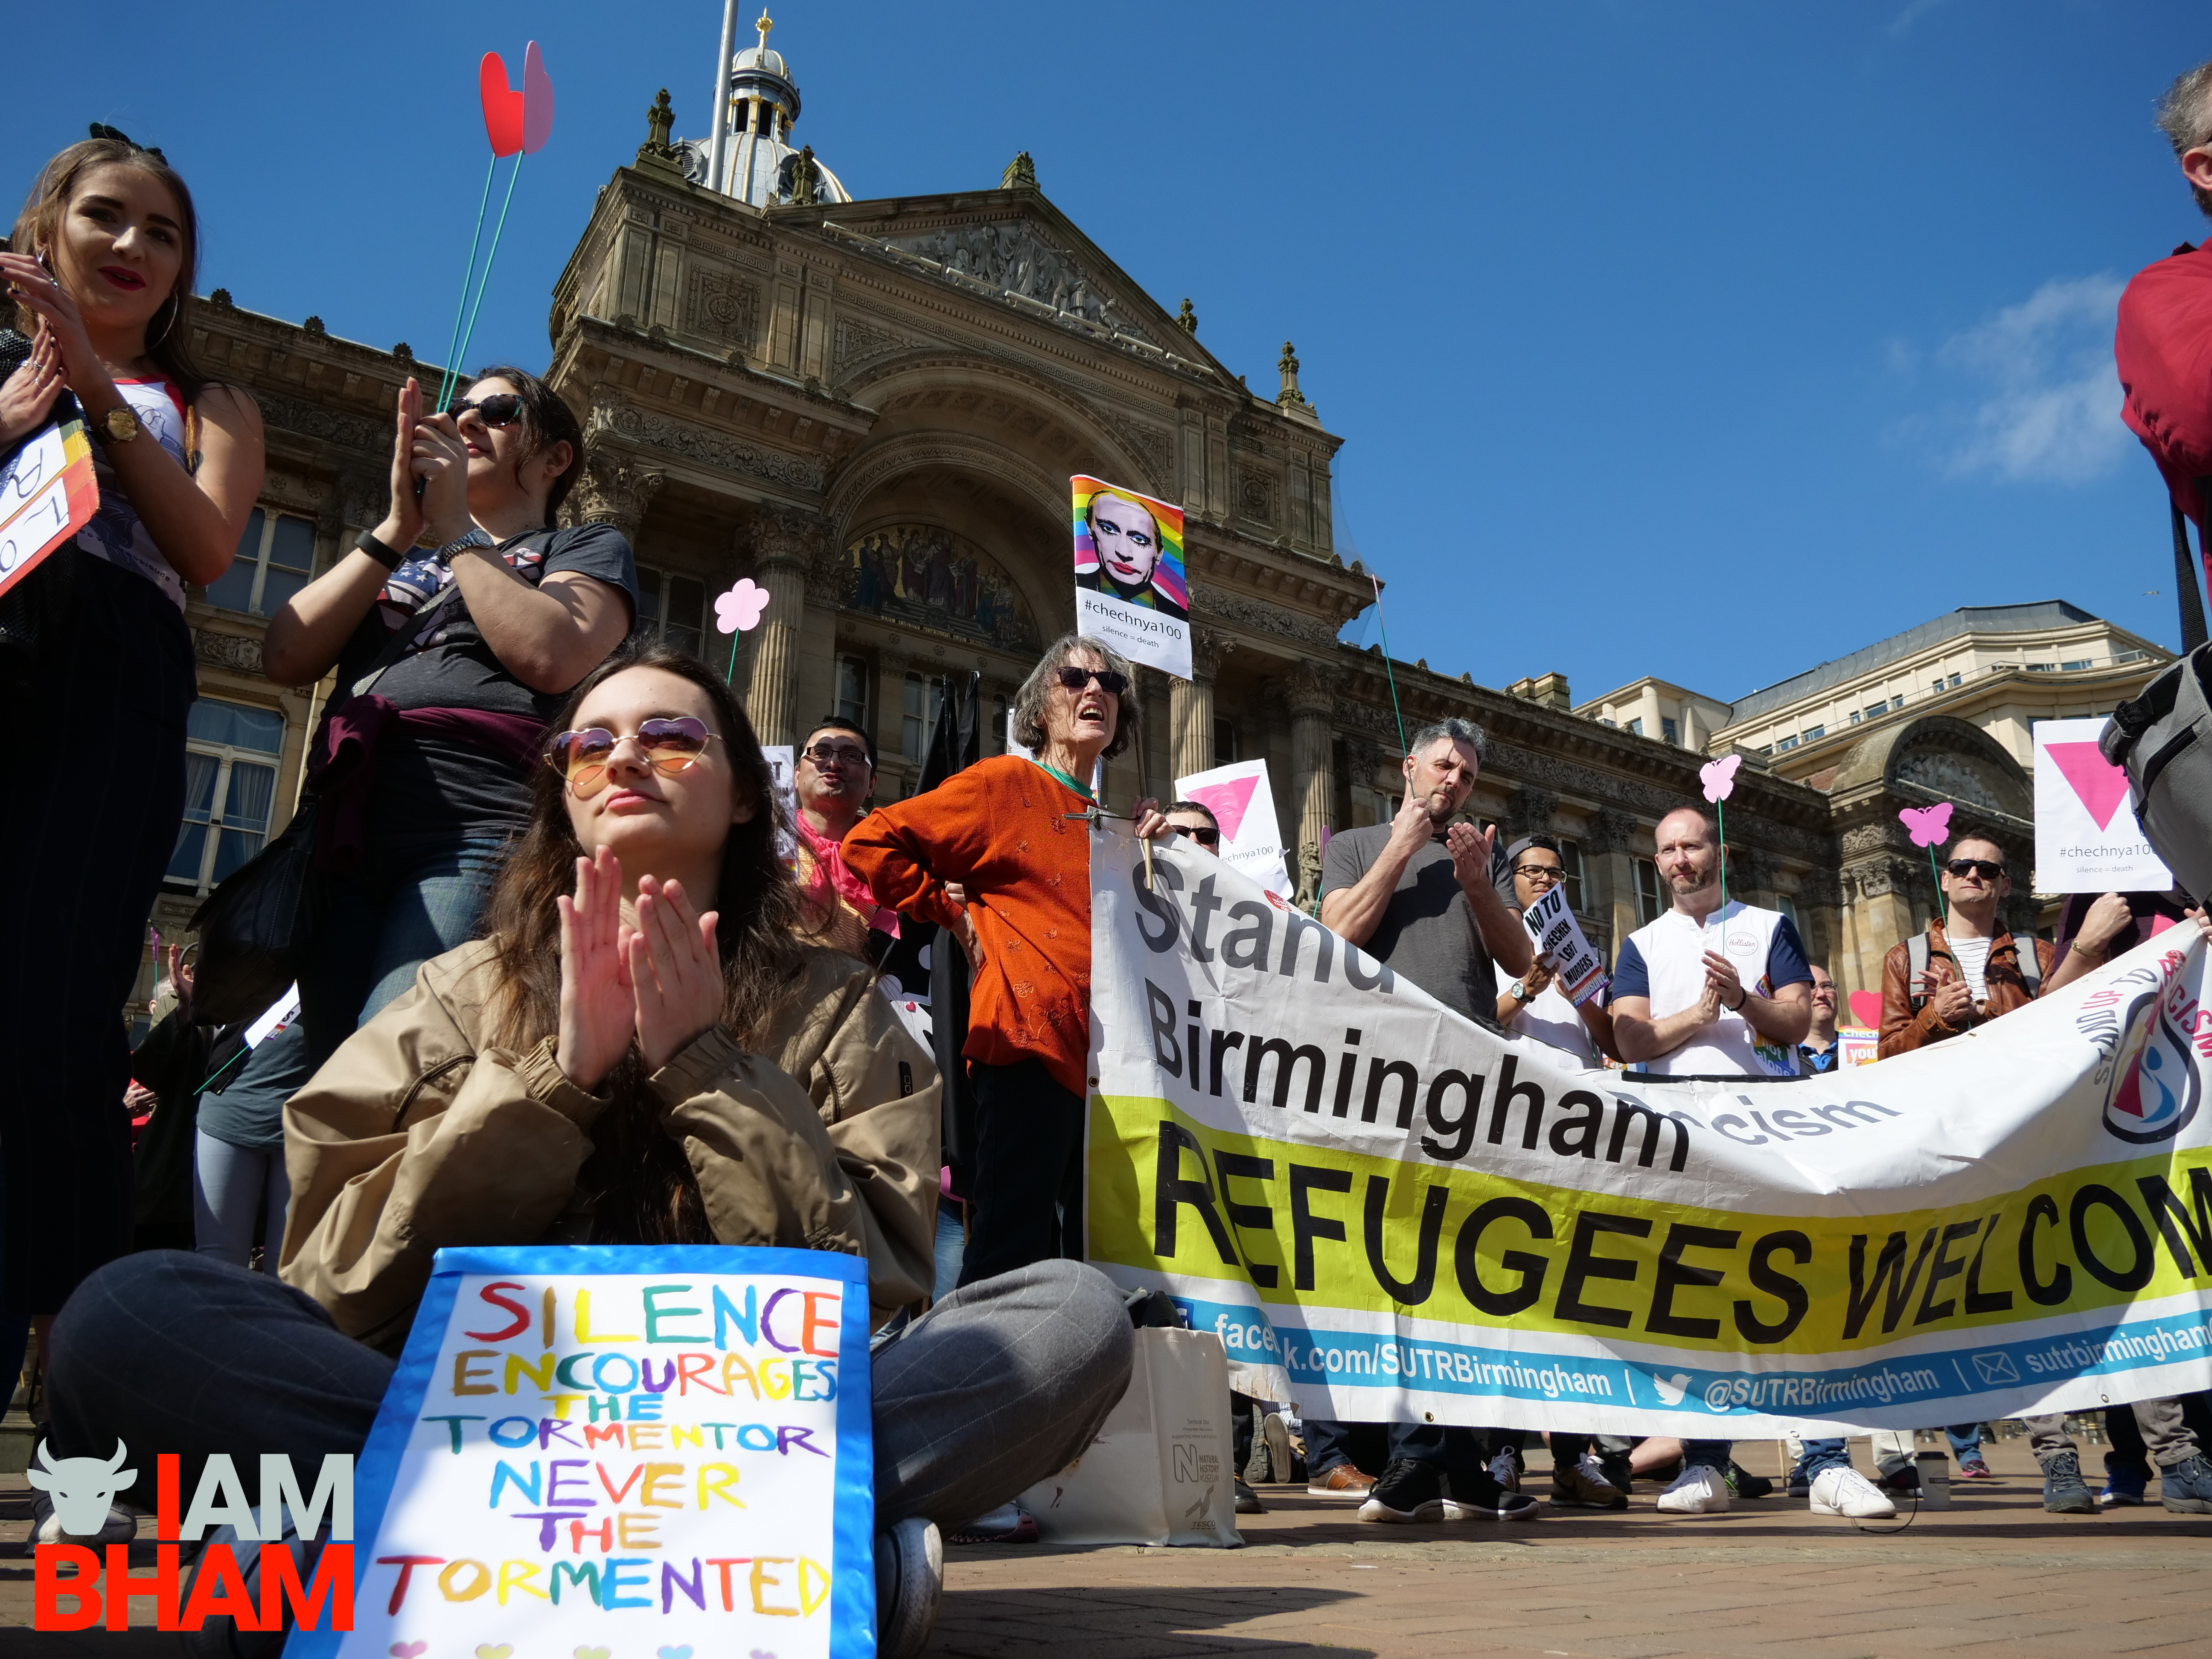 A pro-LGBT rally was held in front of the Council House in Victoria Square, Birmingham (Photograph: Adam Yosef)